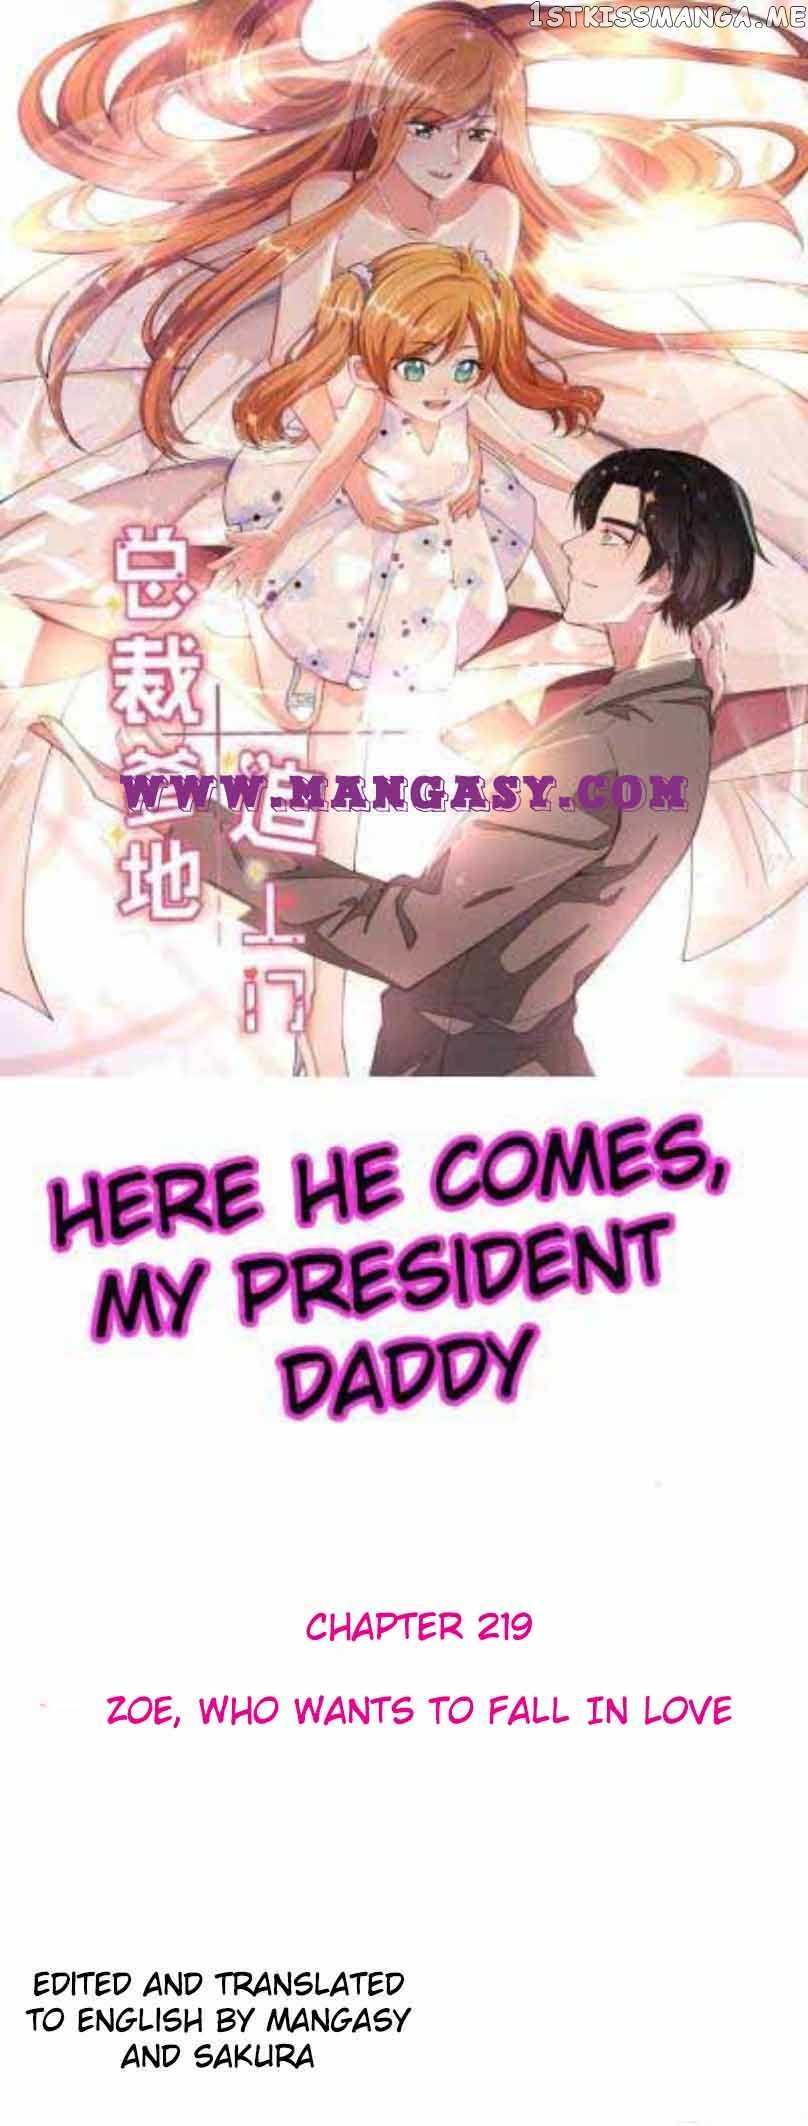 President Daddy Is Chasing You - Page 2